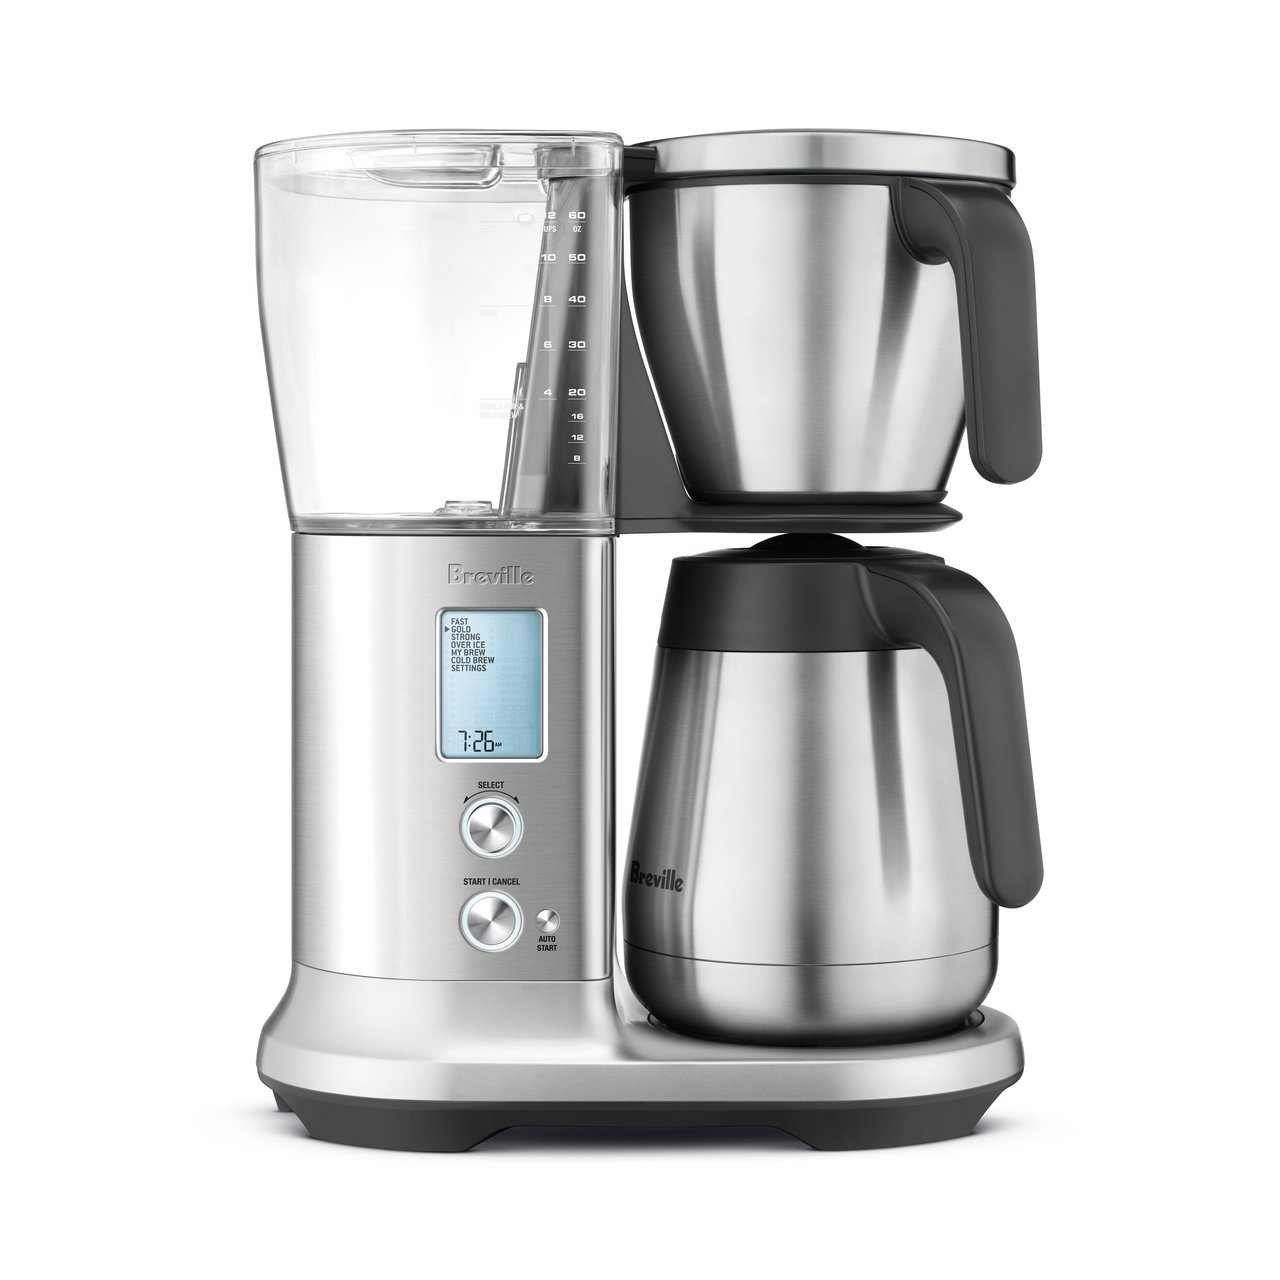 4 The 12-Cup Precision Hot Beverage Maker